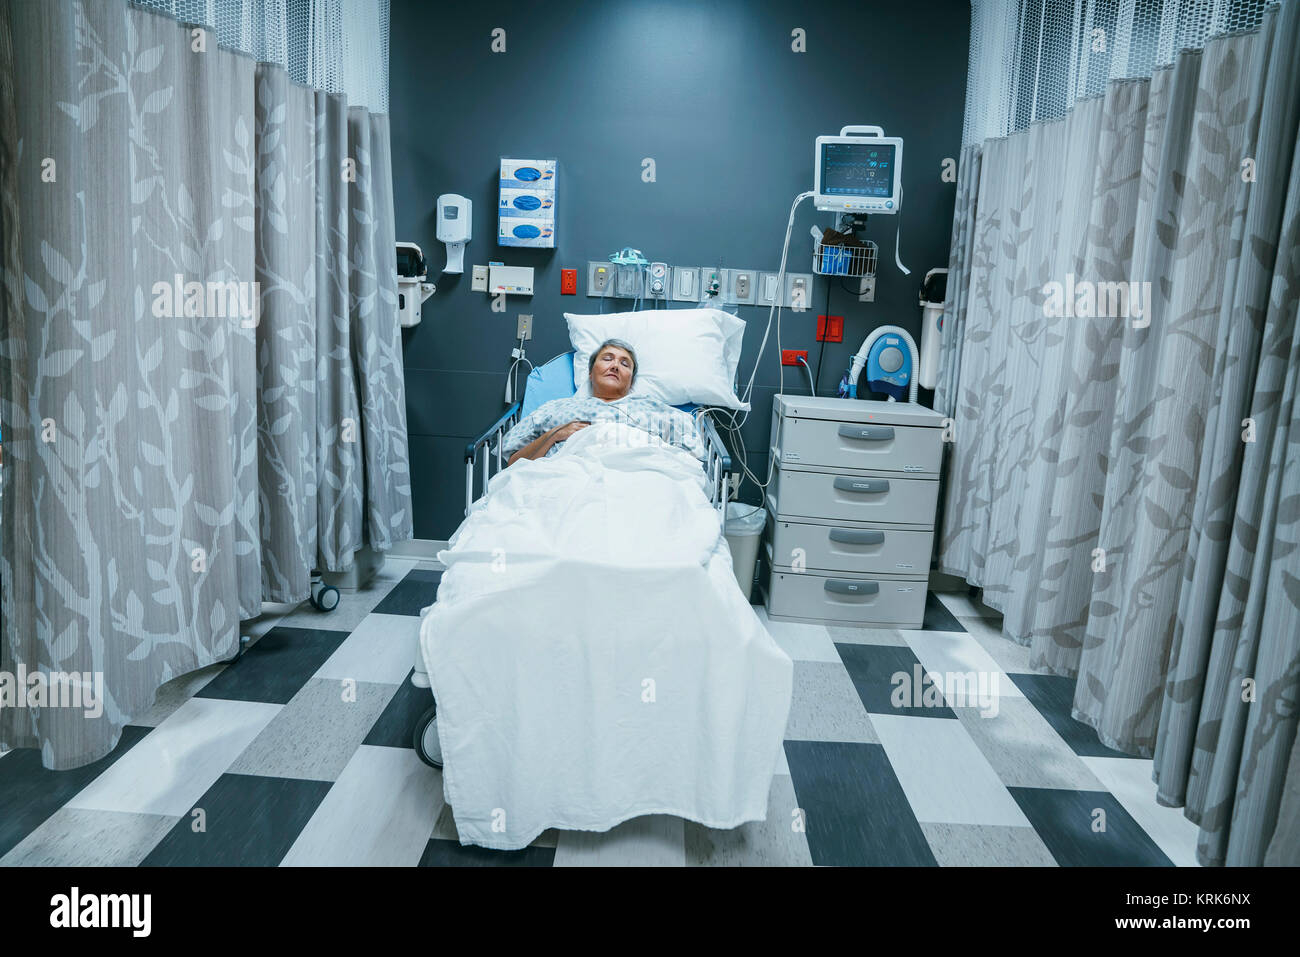 Mixed race patient sleeping in hospital bed Stock Photo